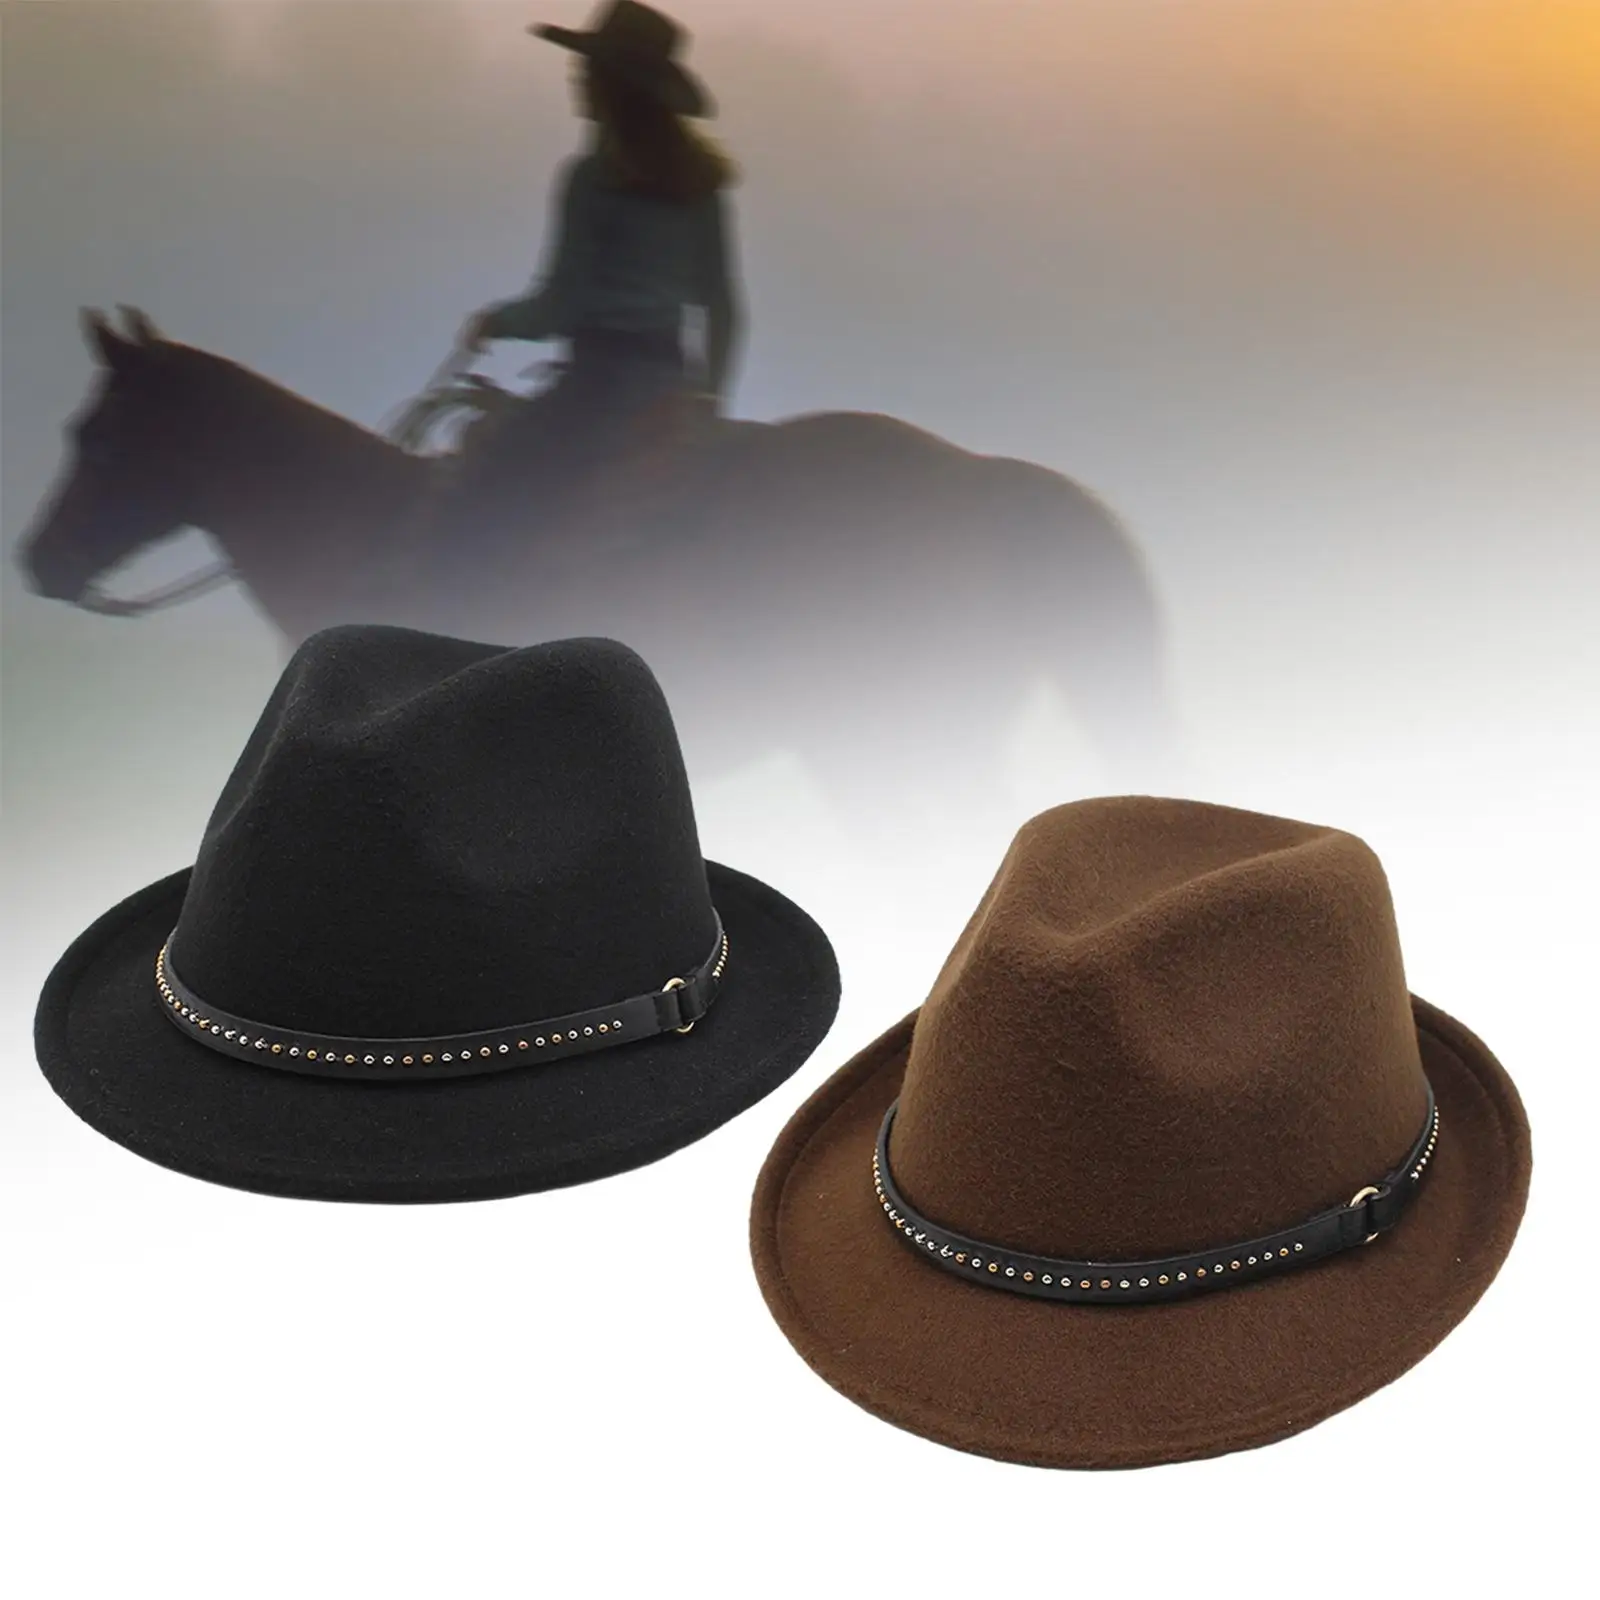 Fedora Hat Decorative Decorated Fashion Western Cowboy Hat Wide Brim Panama Hat for Stage Performance Fancy Dress Outdoor Events